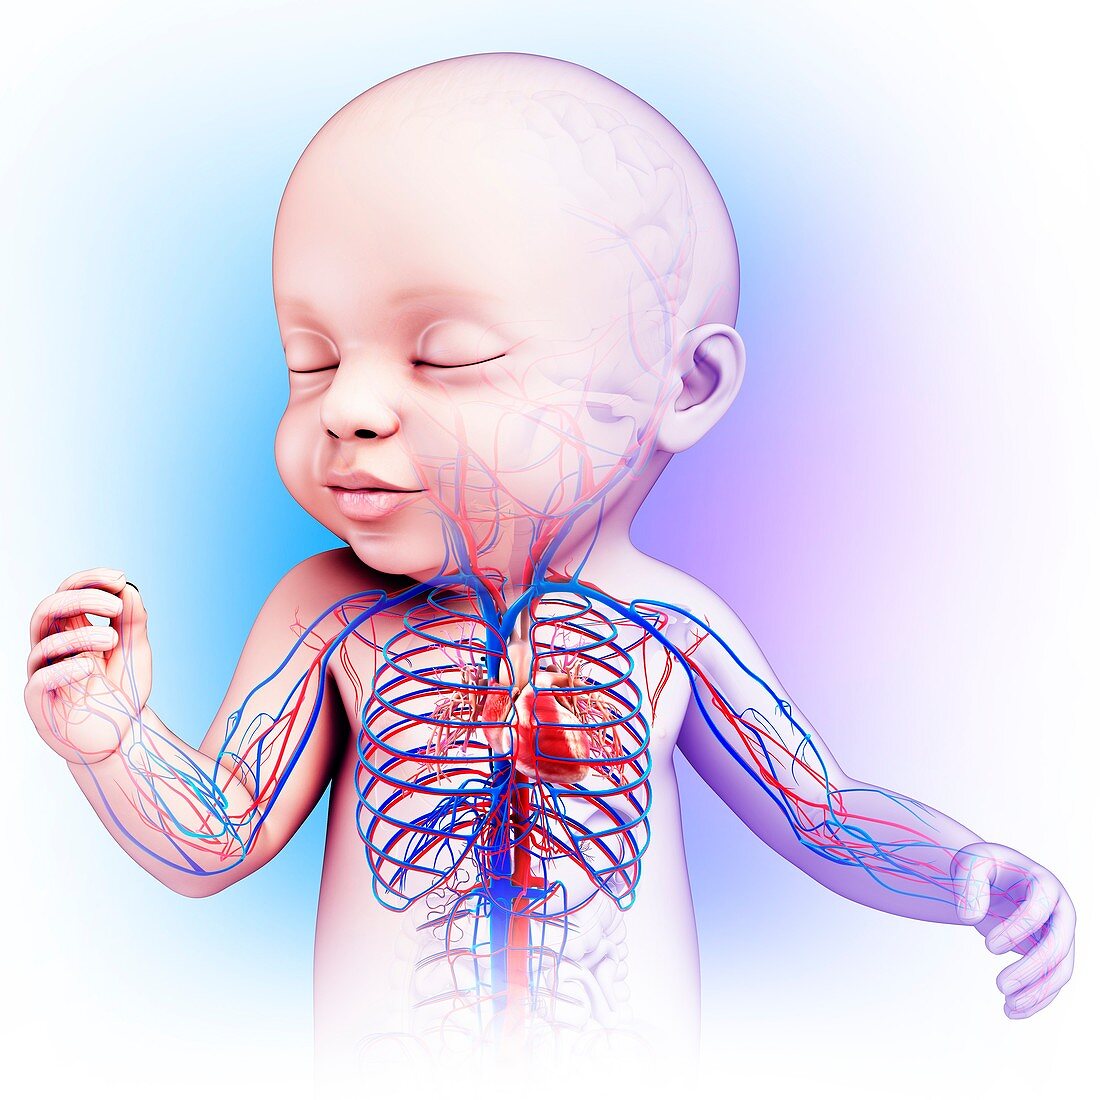 Baby's heart and circulatory system, illustration